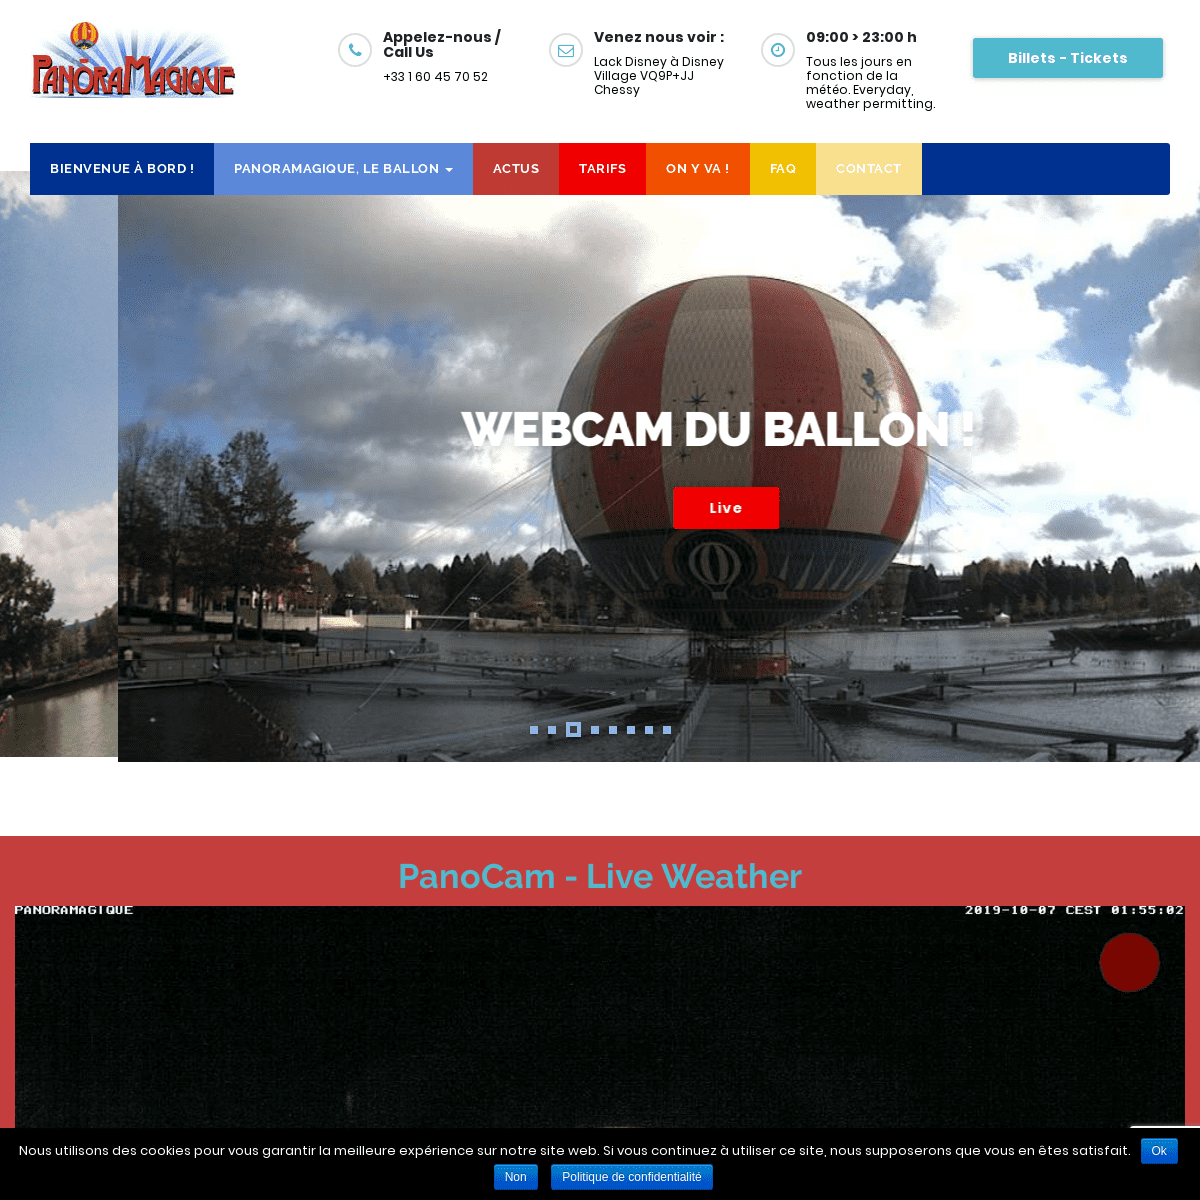 A complete backup of panoramagique.com